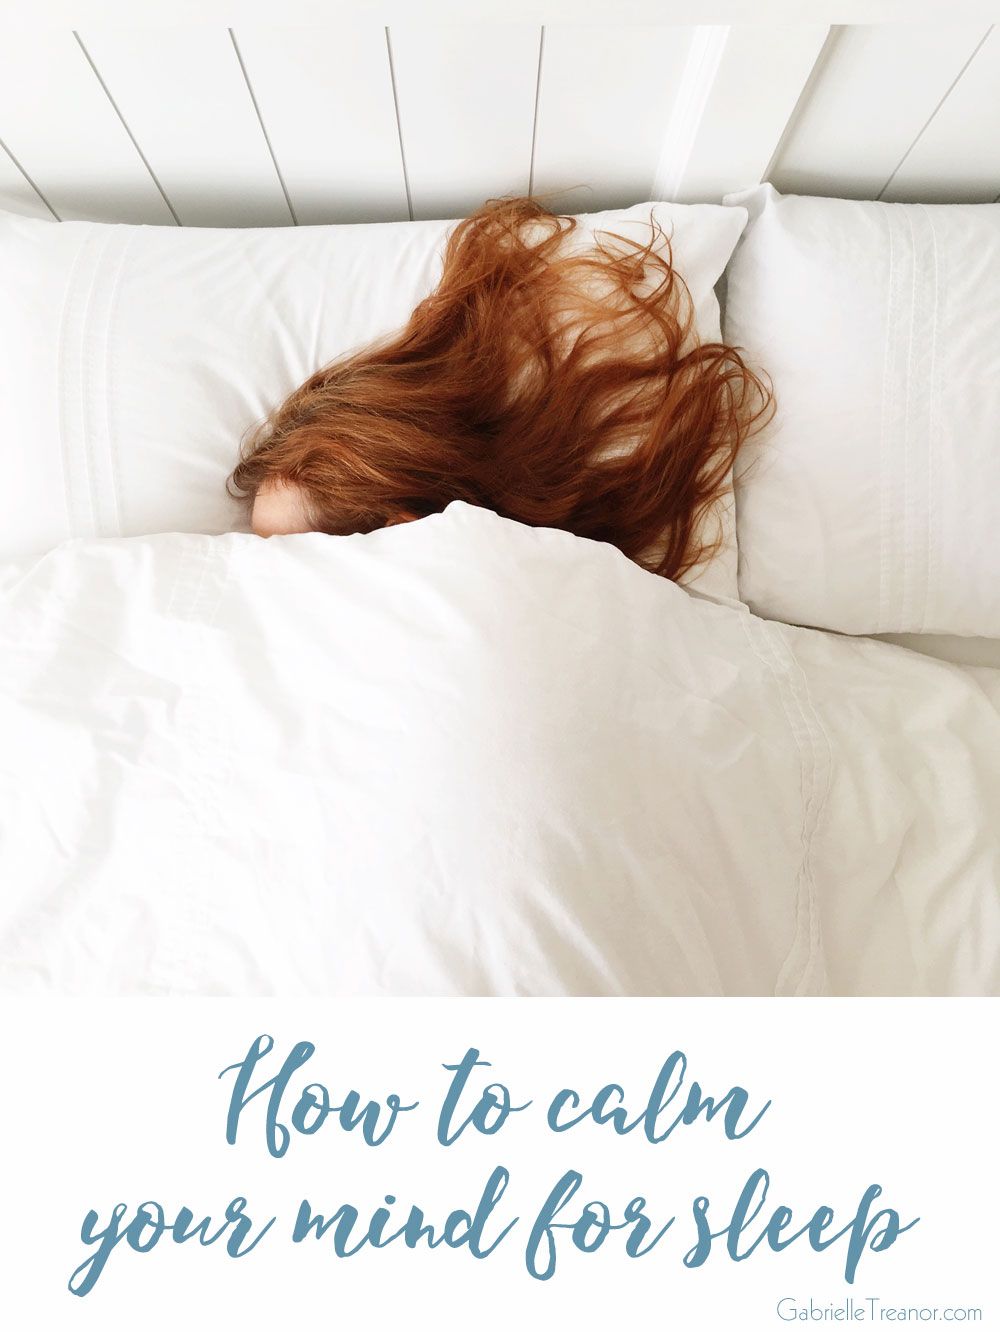 How to calm your mind for sleep